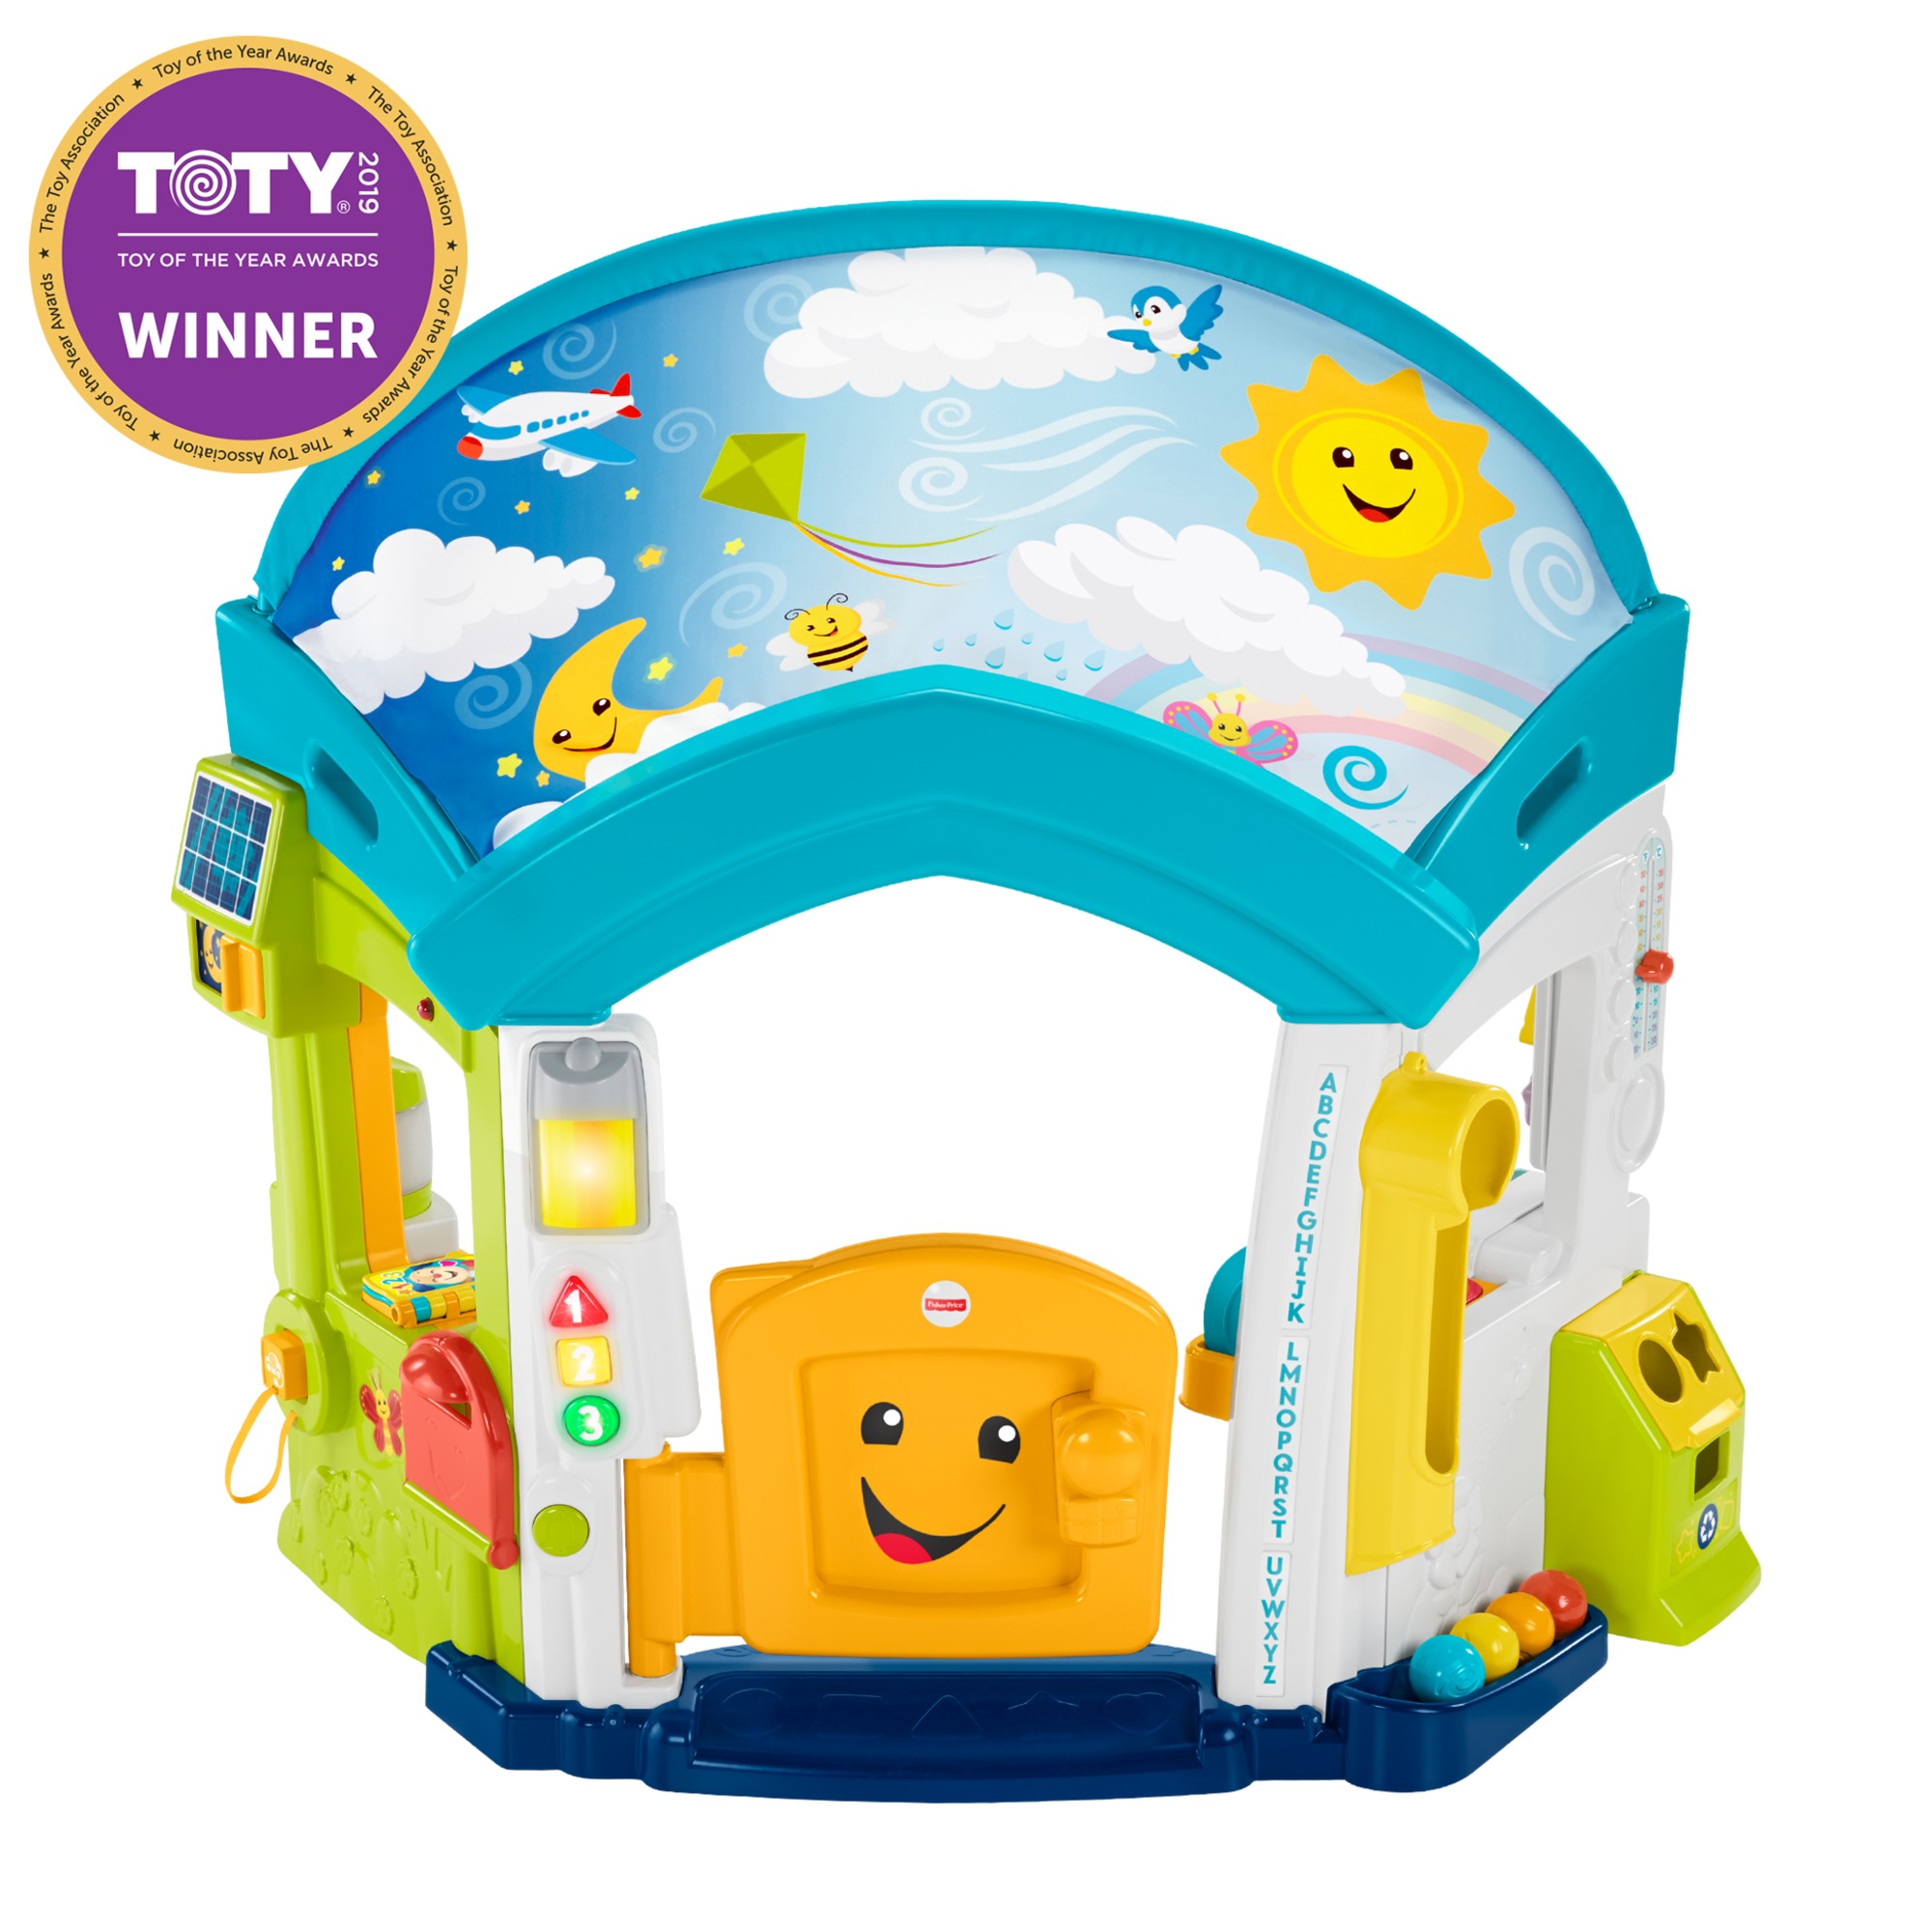 Fisher-Price Laugh & Learn Playhouse Educational Toy for Babies & Toddlers, Smart Learning Home - image 3 of 25